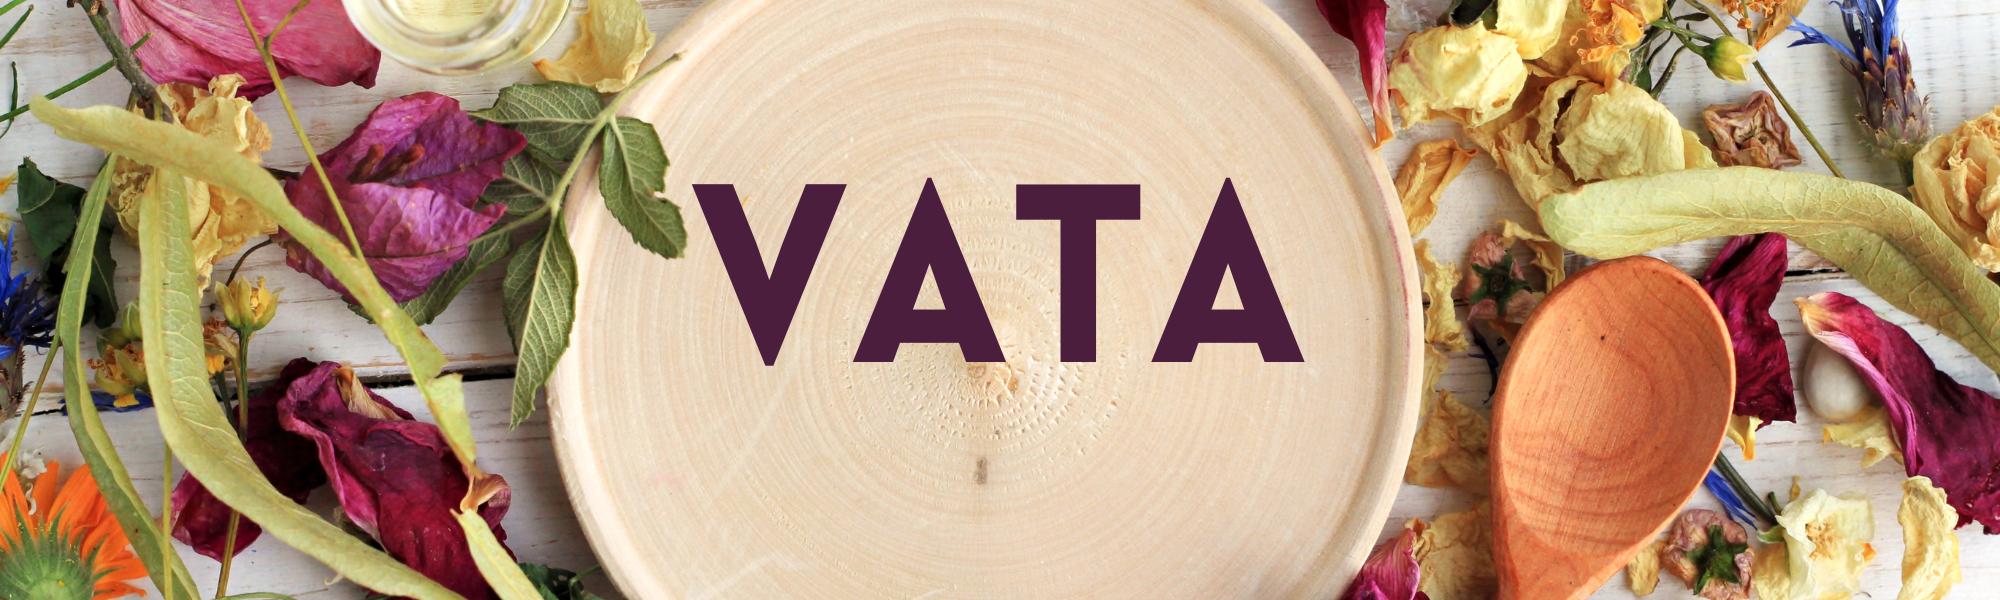 Vata Suggested Products